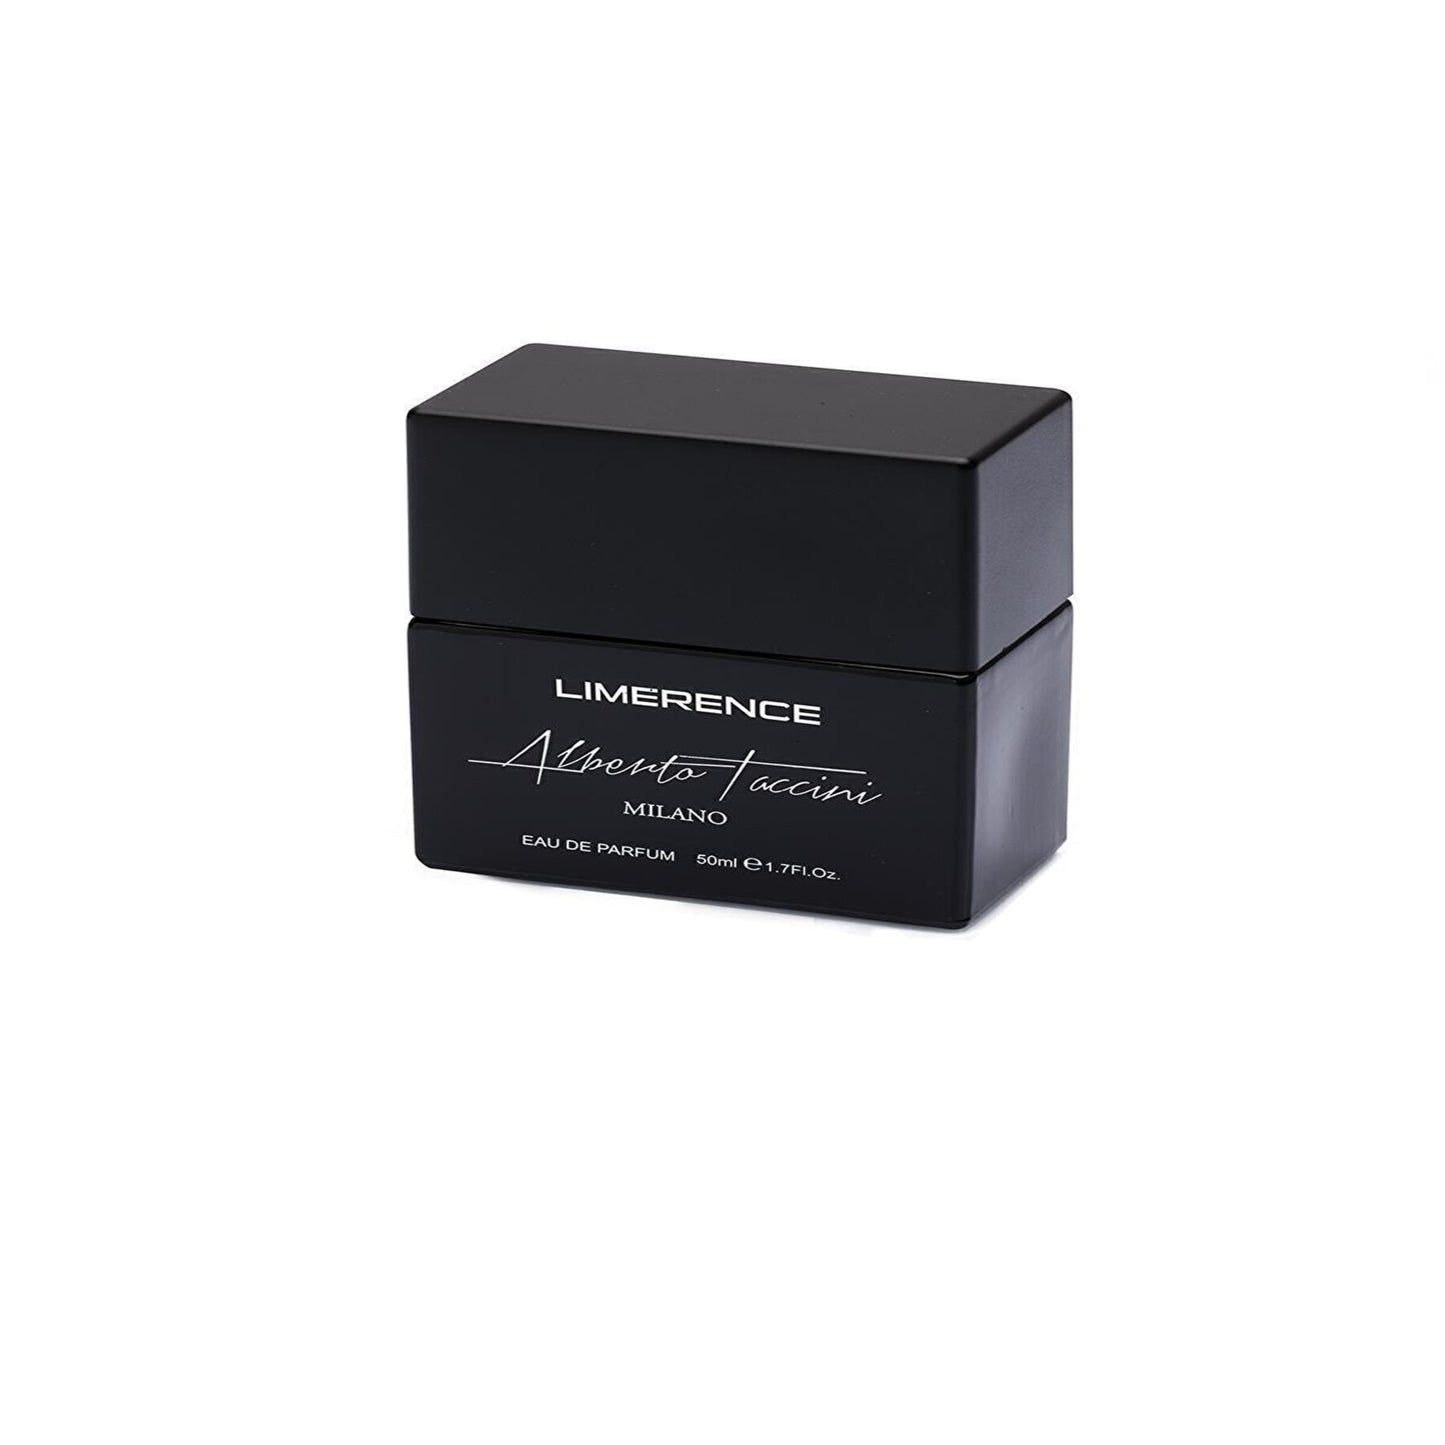 Alberto Taccini Milano Limerence Parfum Homme